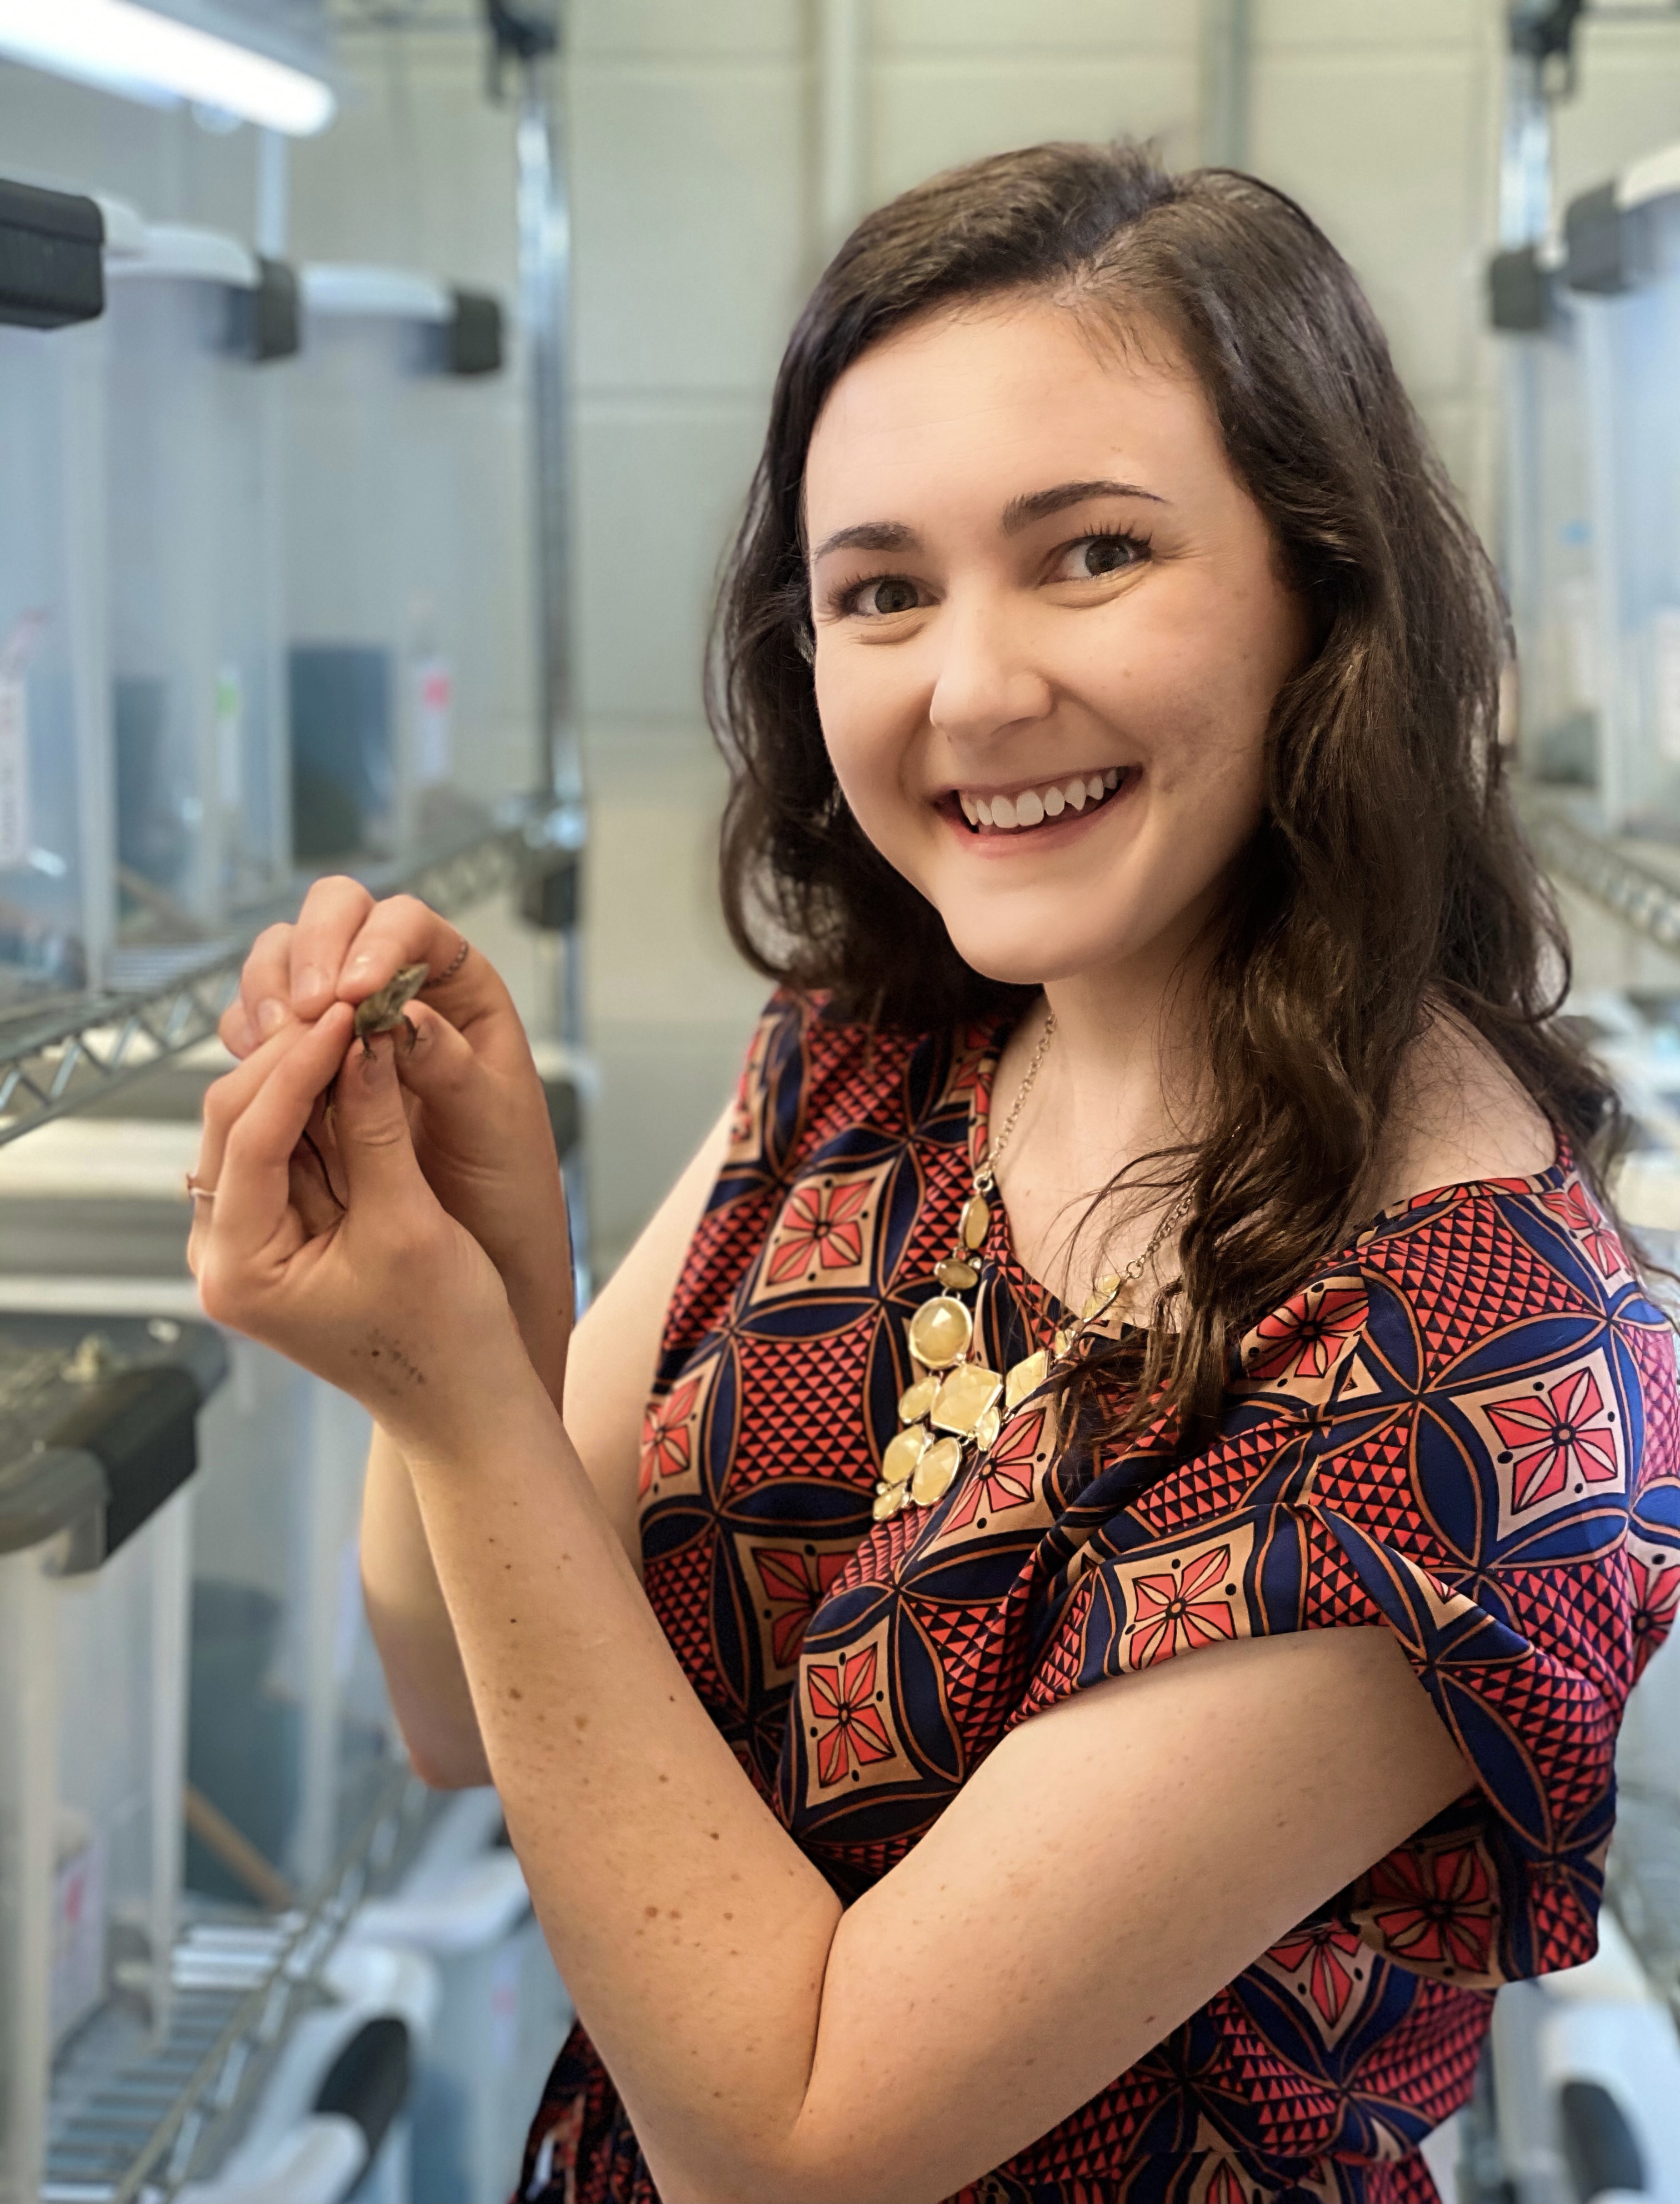 The Eppley Foundation for Sciences awards Kaitlyn Murphy from the Department of Biological Sciences $19,000 grant